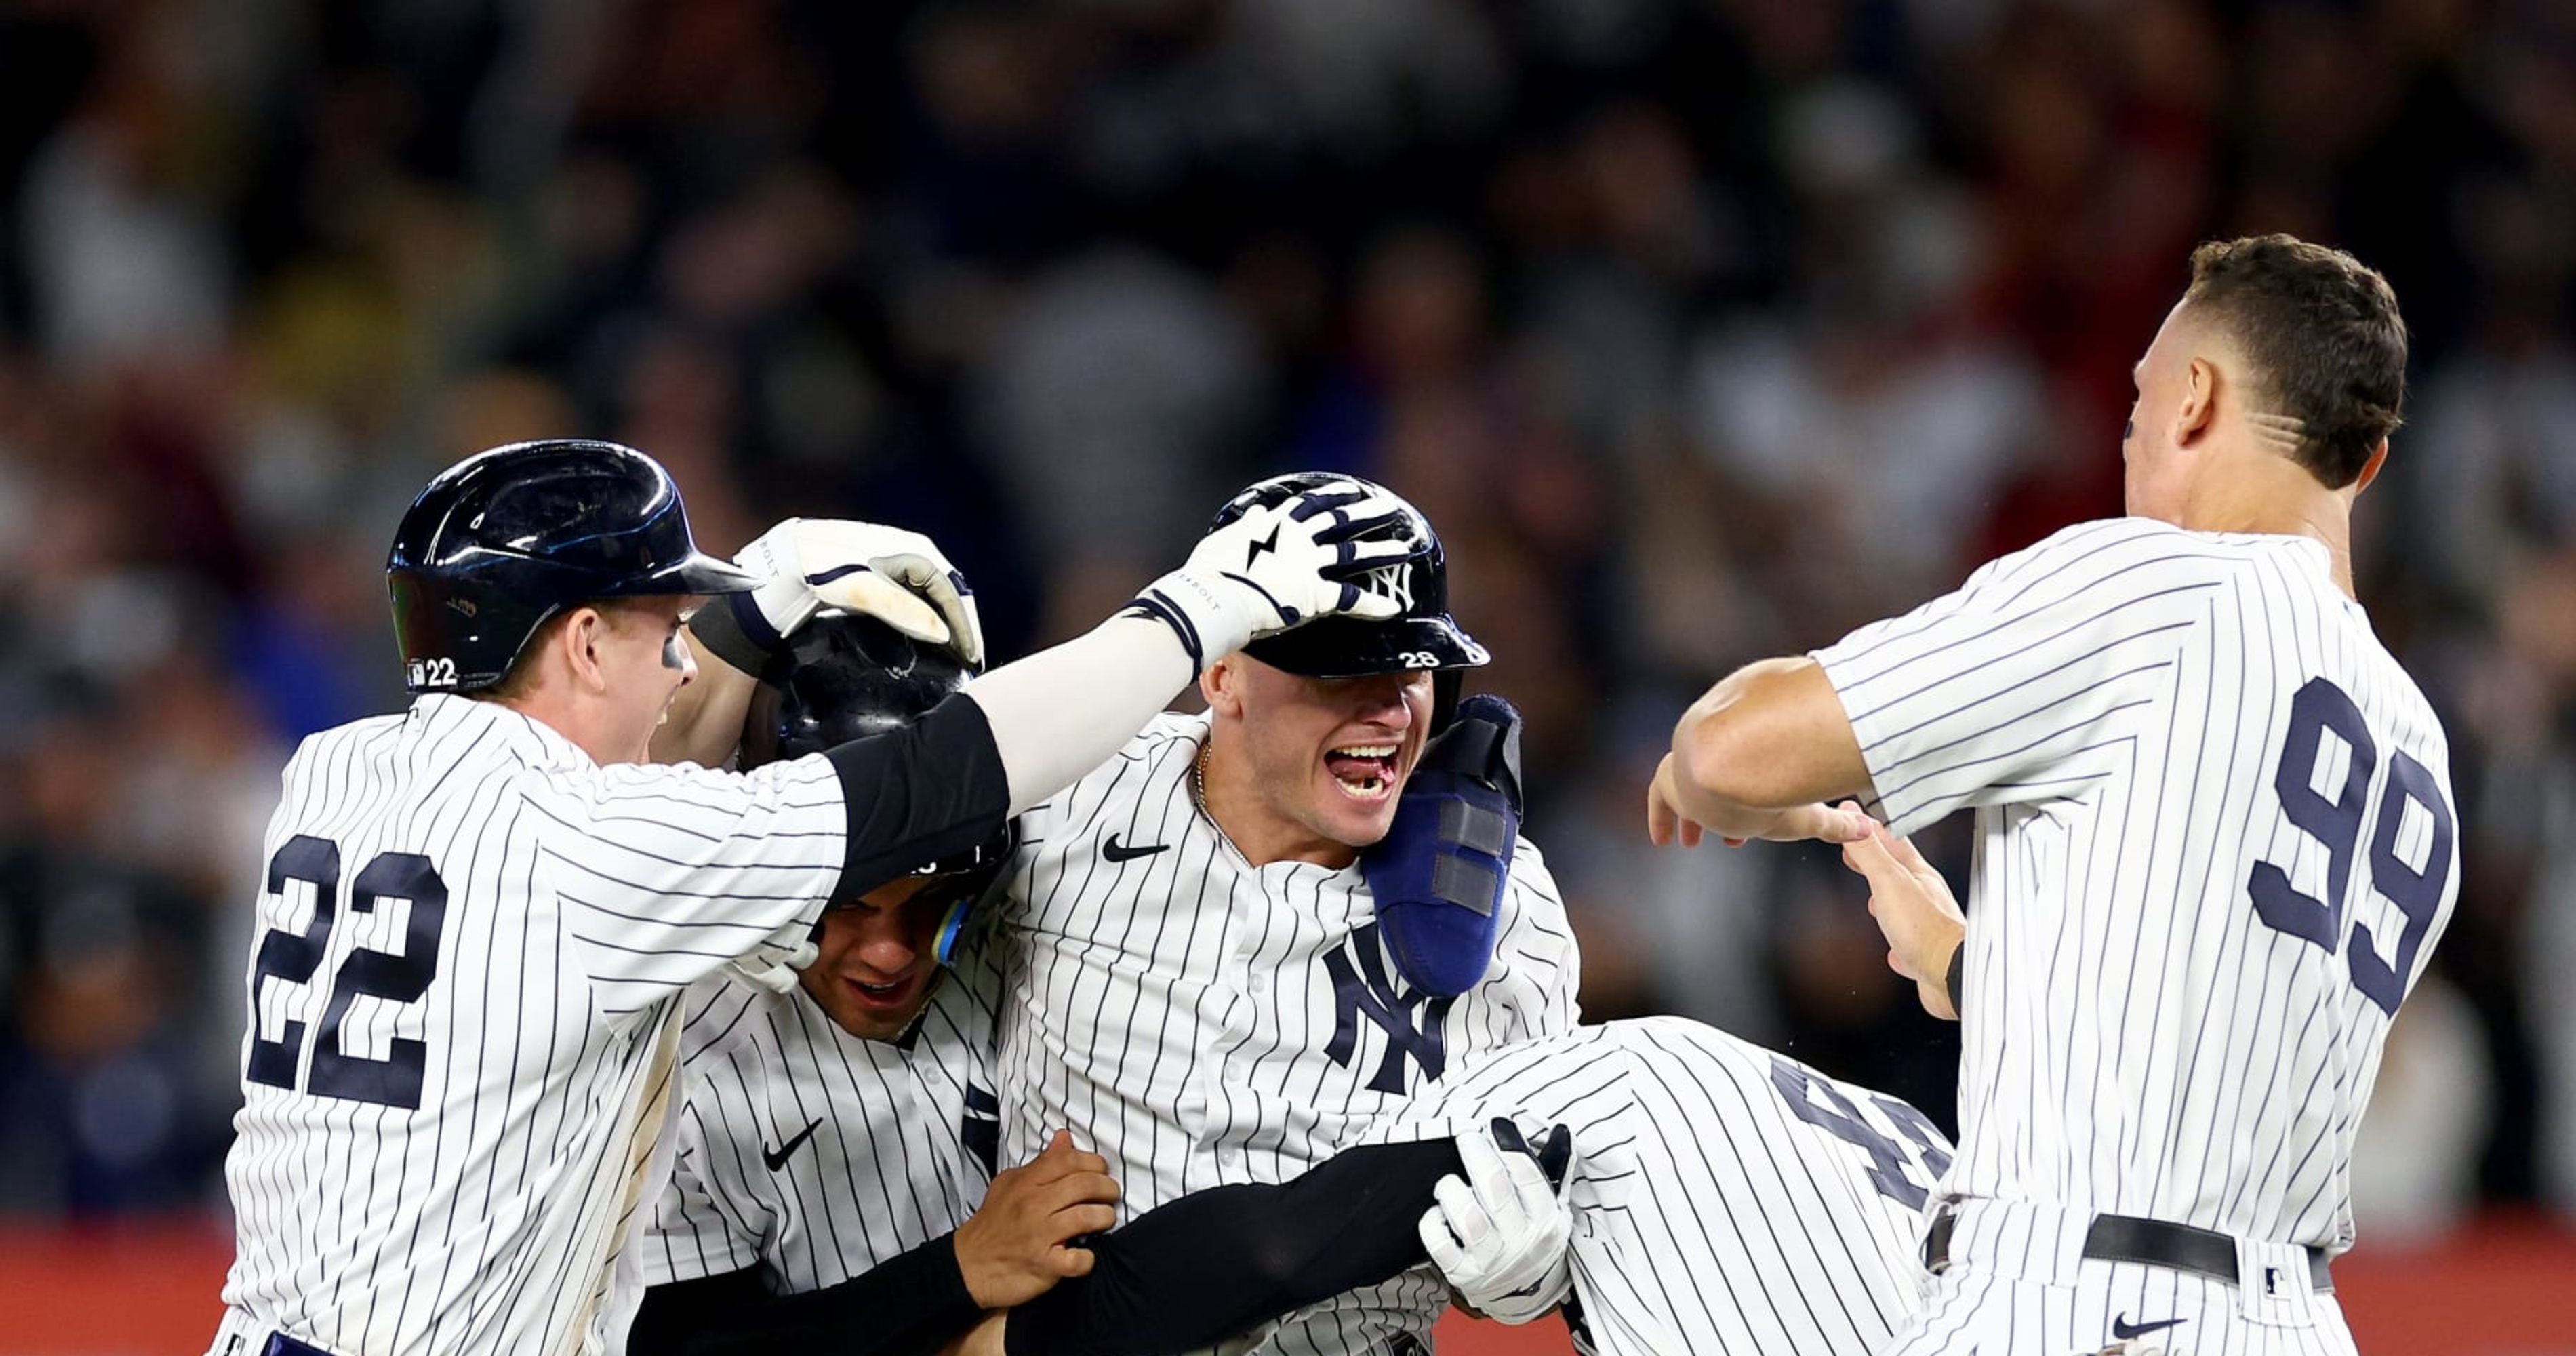 Yankees Clinch AL East with 5-2 Win vs. Blue Jays